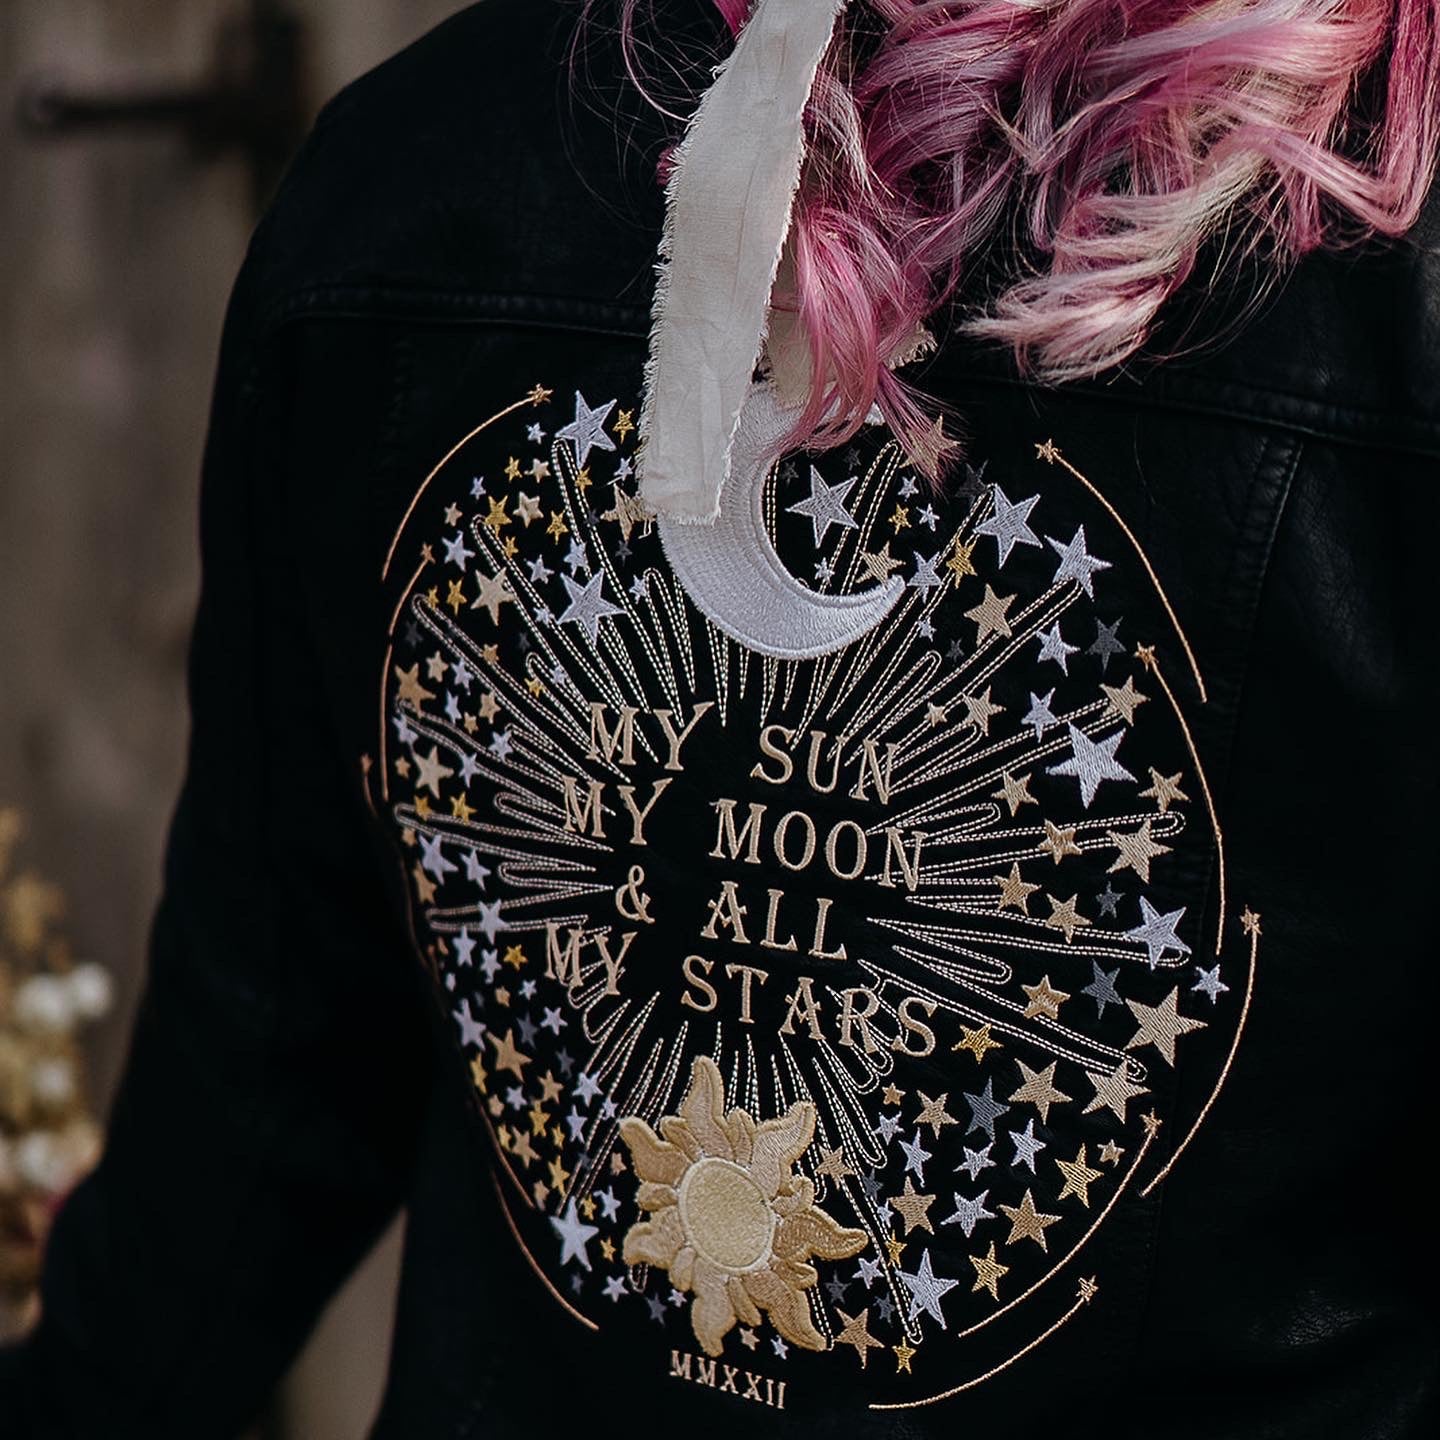 My Sun, My Moon & All My Stars Black Leather Jacket – a chic and symbolic accessory for a stylish bride